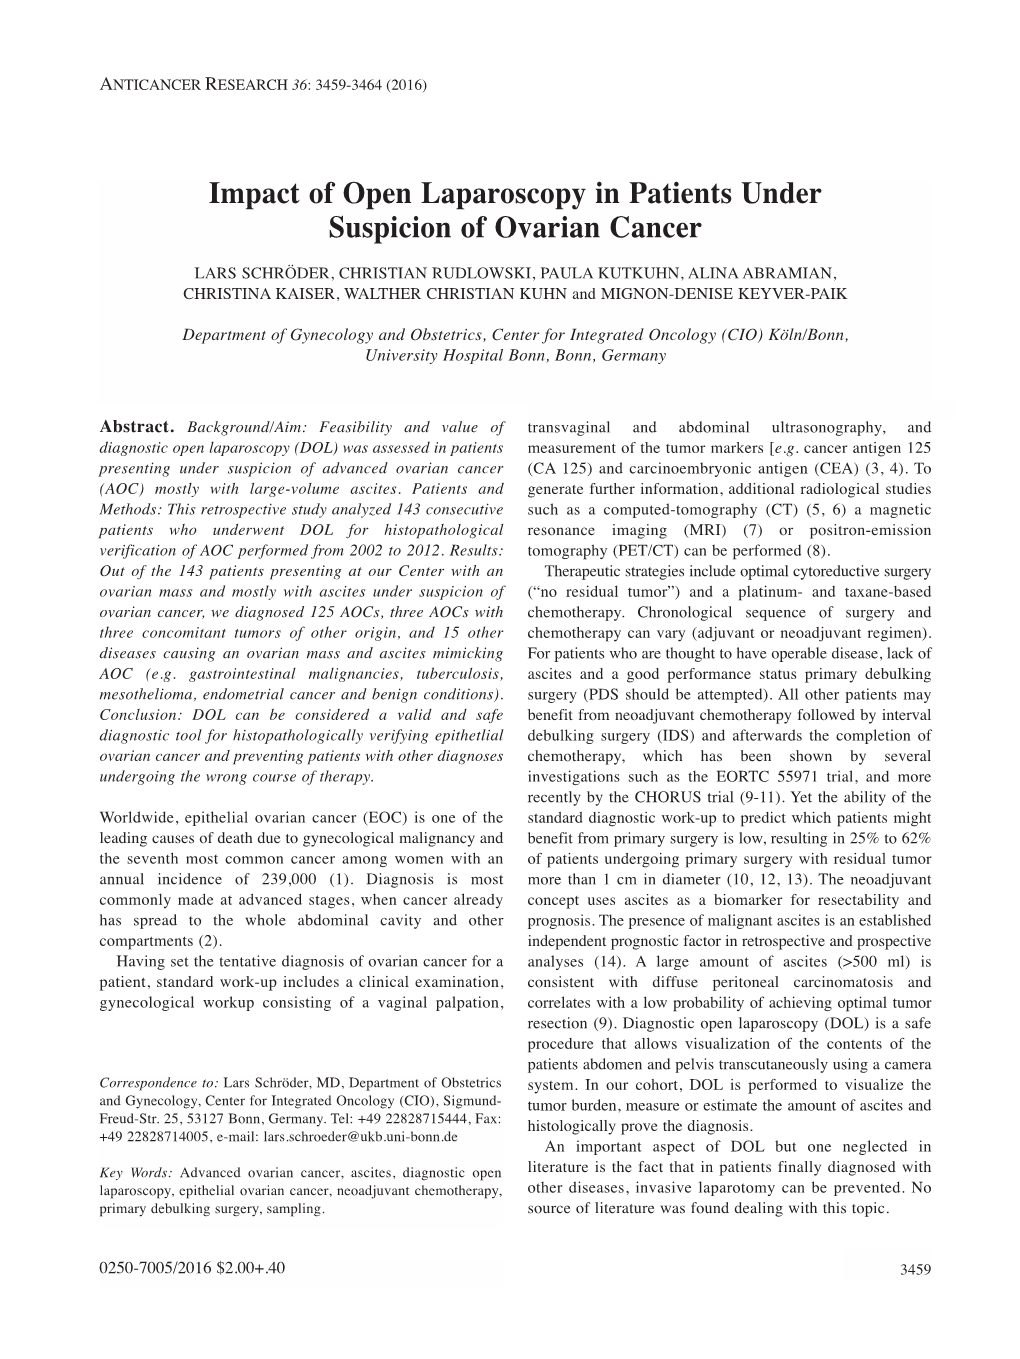 Impact of Open Laparoscopy in Patients Under Suspicion of Ovarian Cancer